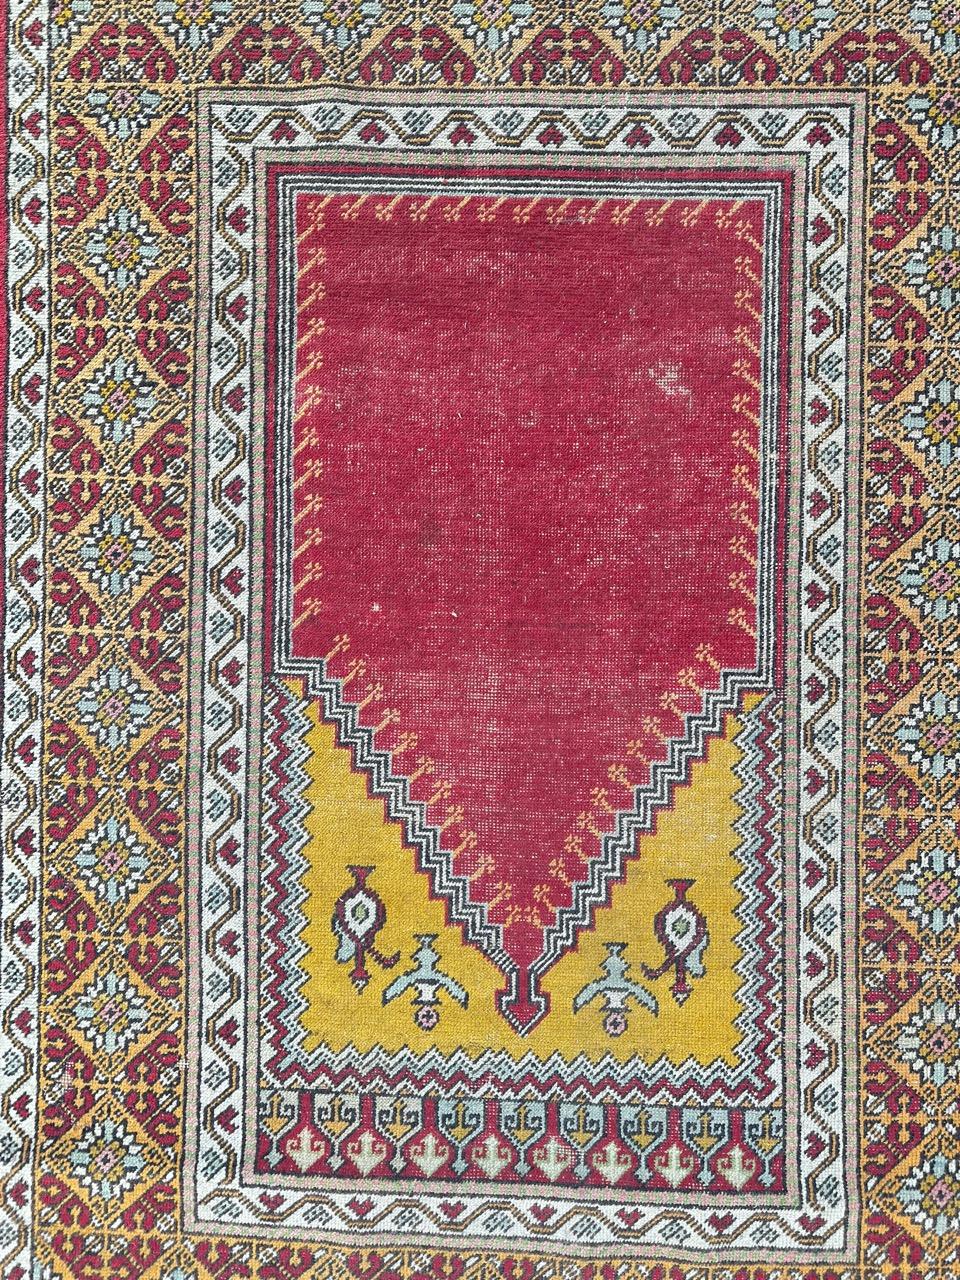 beautiful antique Turkish rug from Anatolia, meticulously hand-knotted with wool velvet on a cotton foundation. This exquisite piece features uniform wear, a mesmerizing mihrab design reminiscent of mosque gates on a striking red background, two